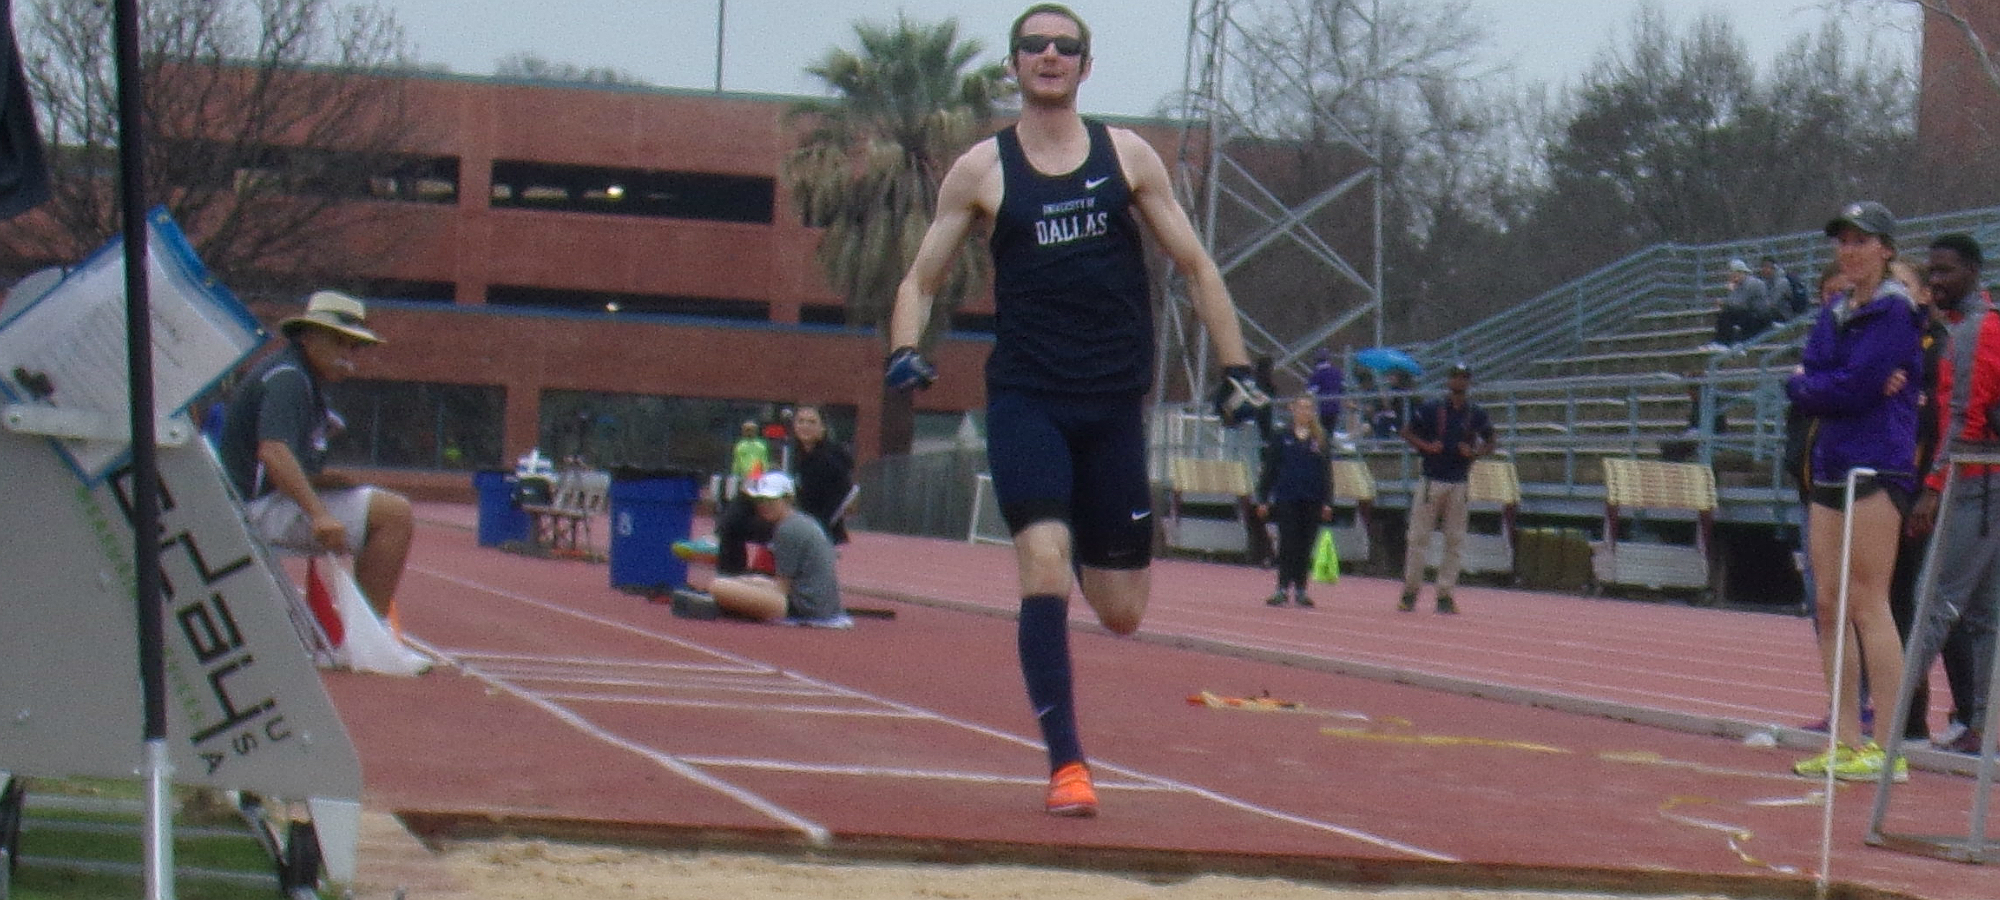 Men's Track & Field race at Trinity Open; Giadolor takes 4th in 100m